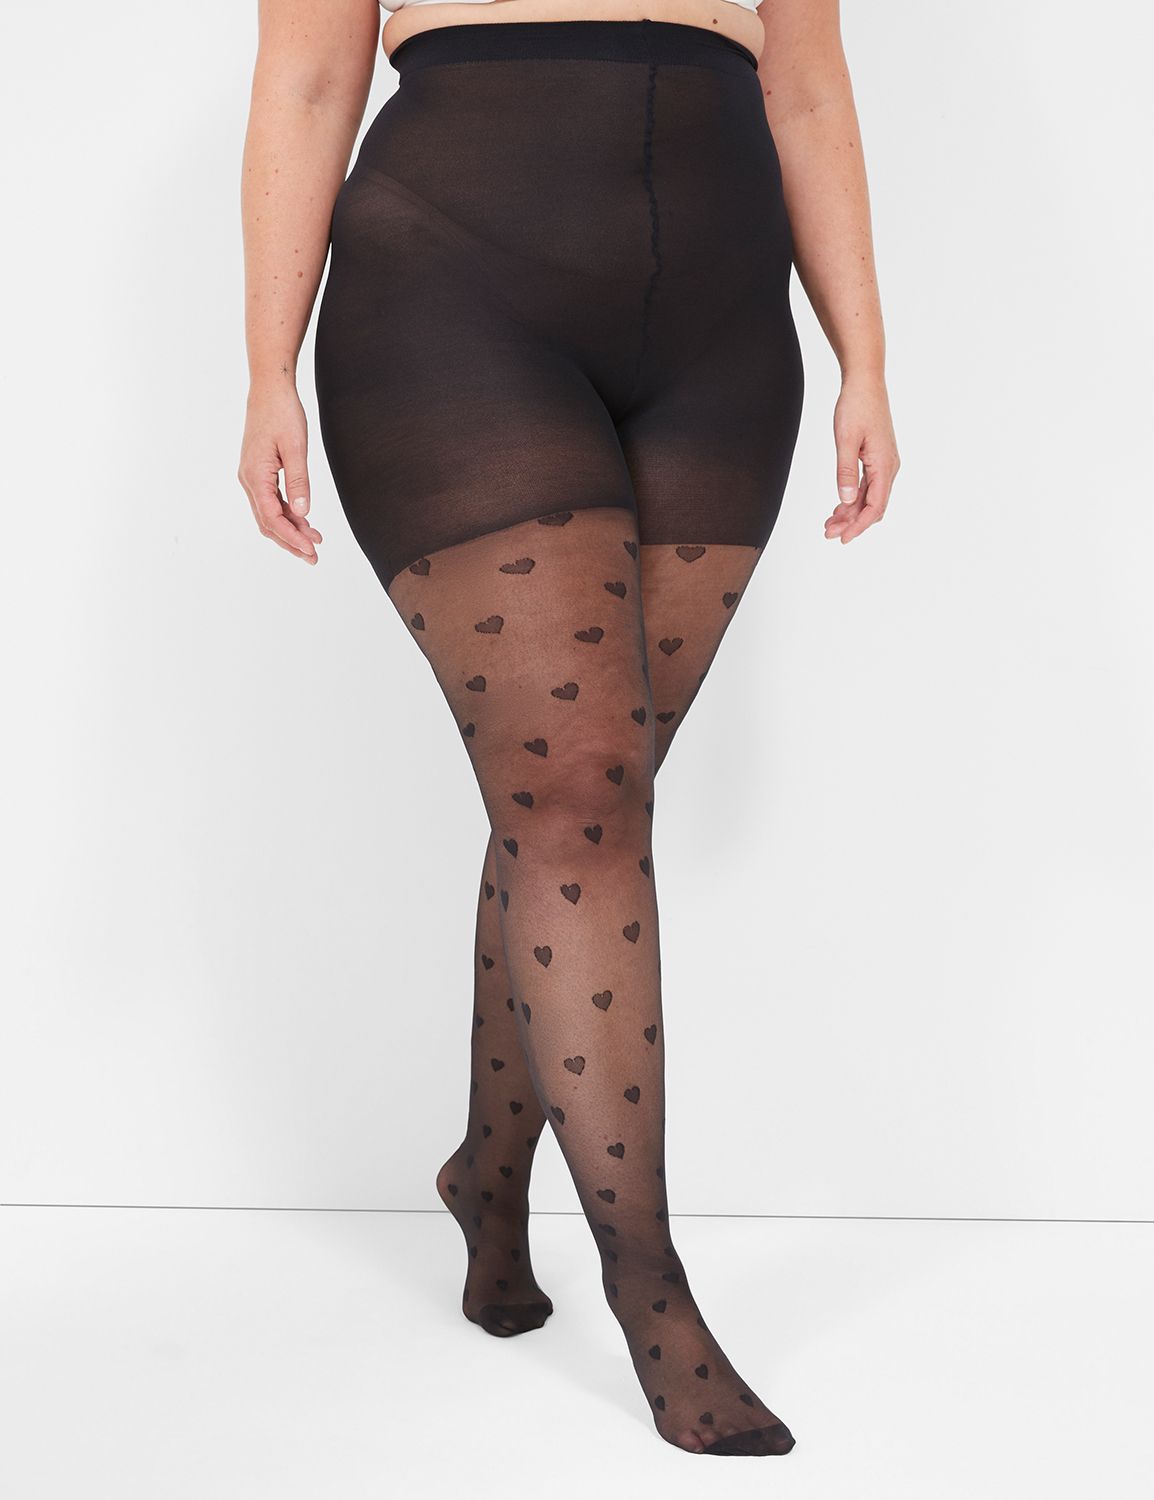 Plus Size Tights 